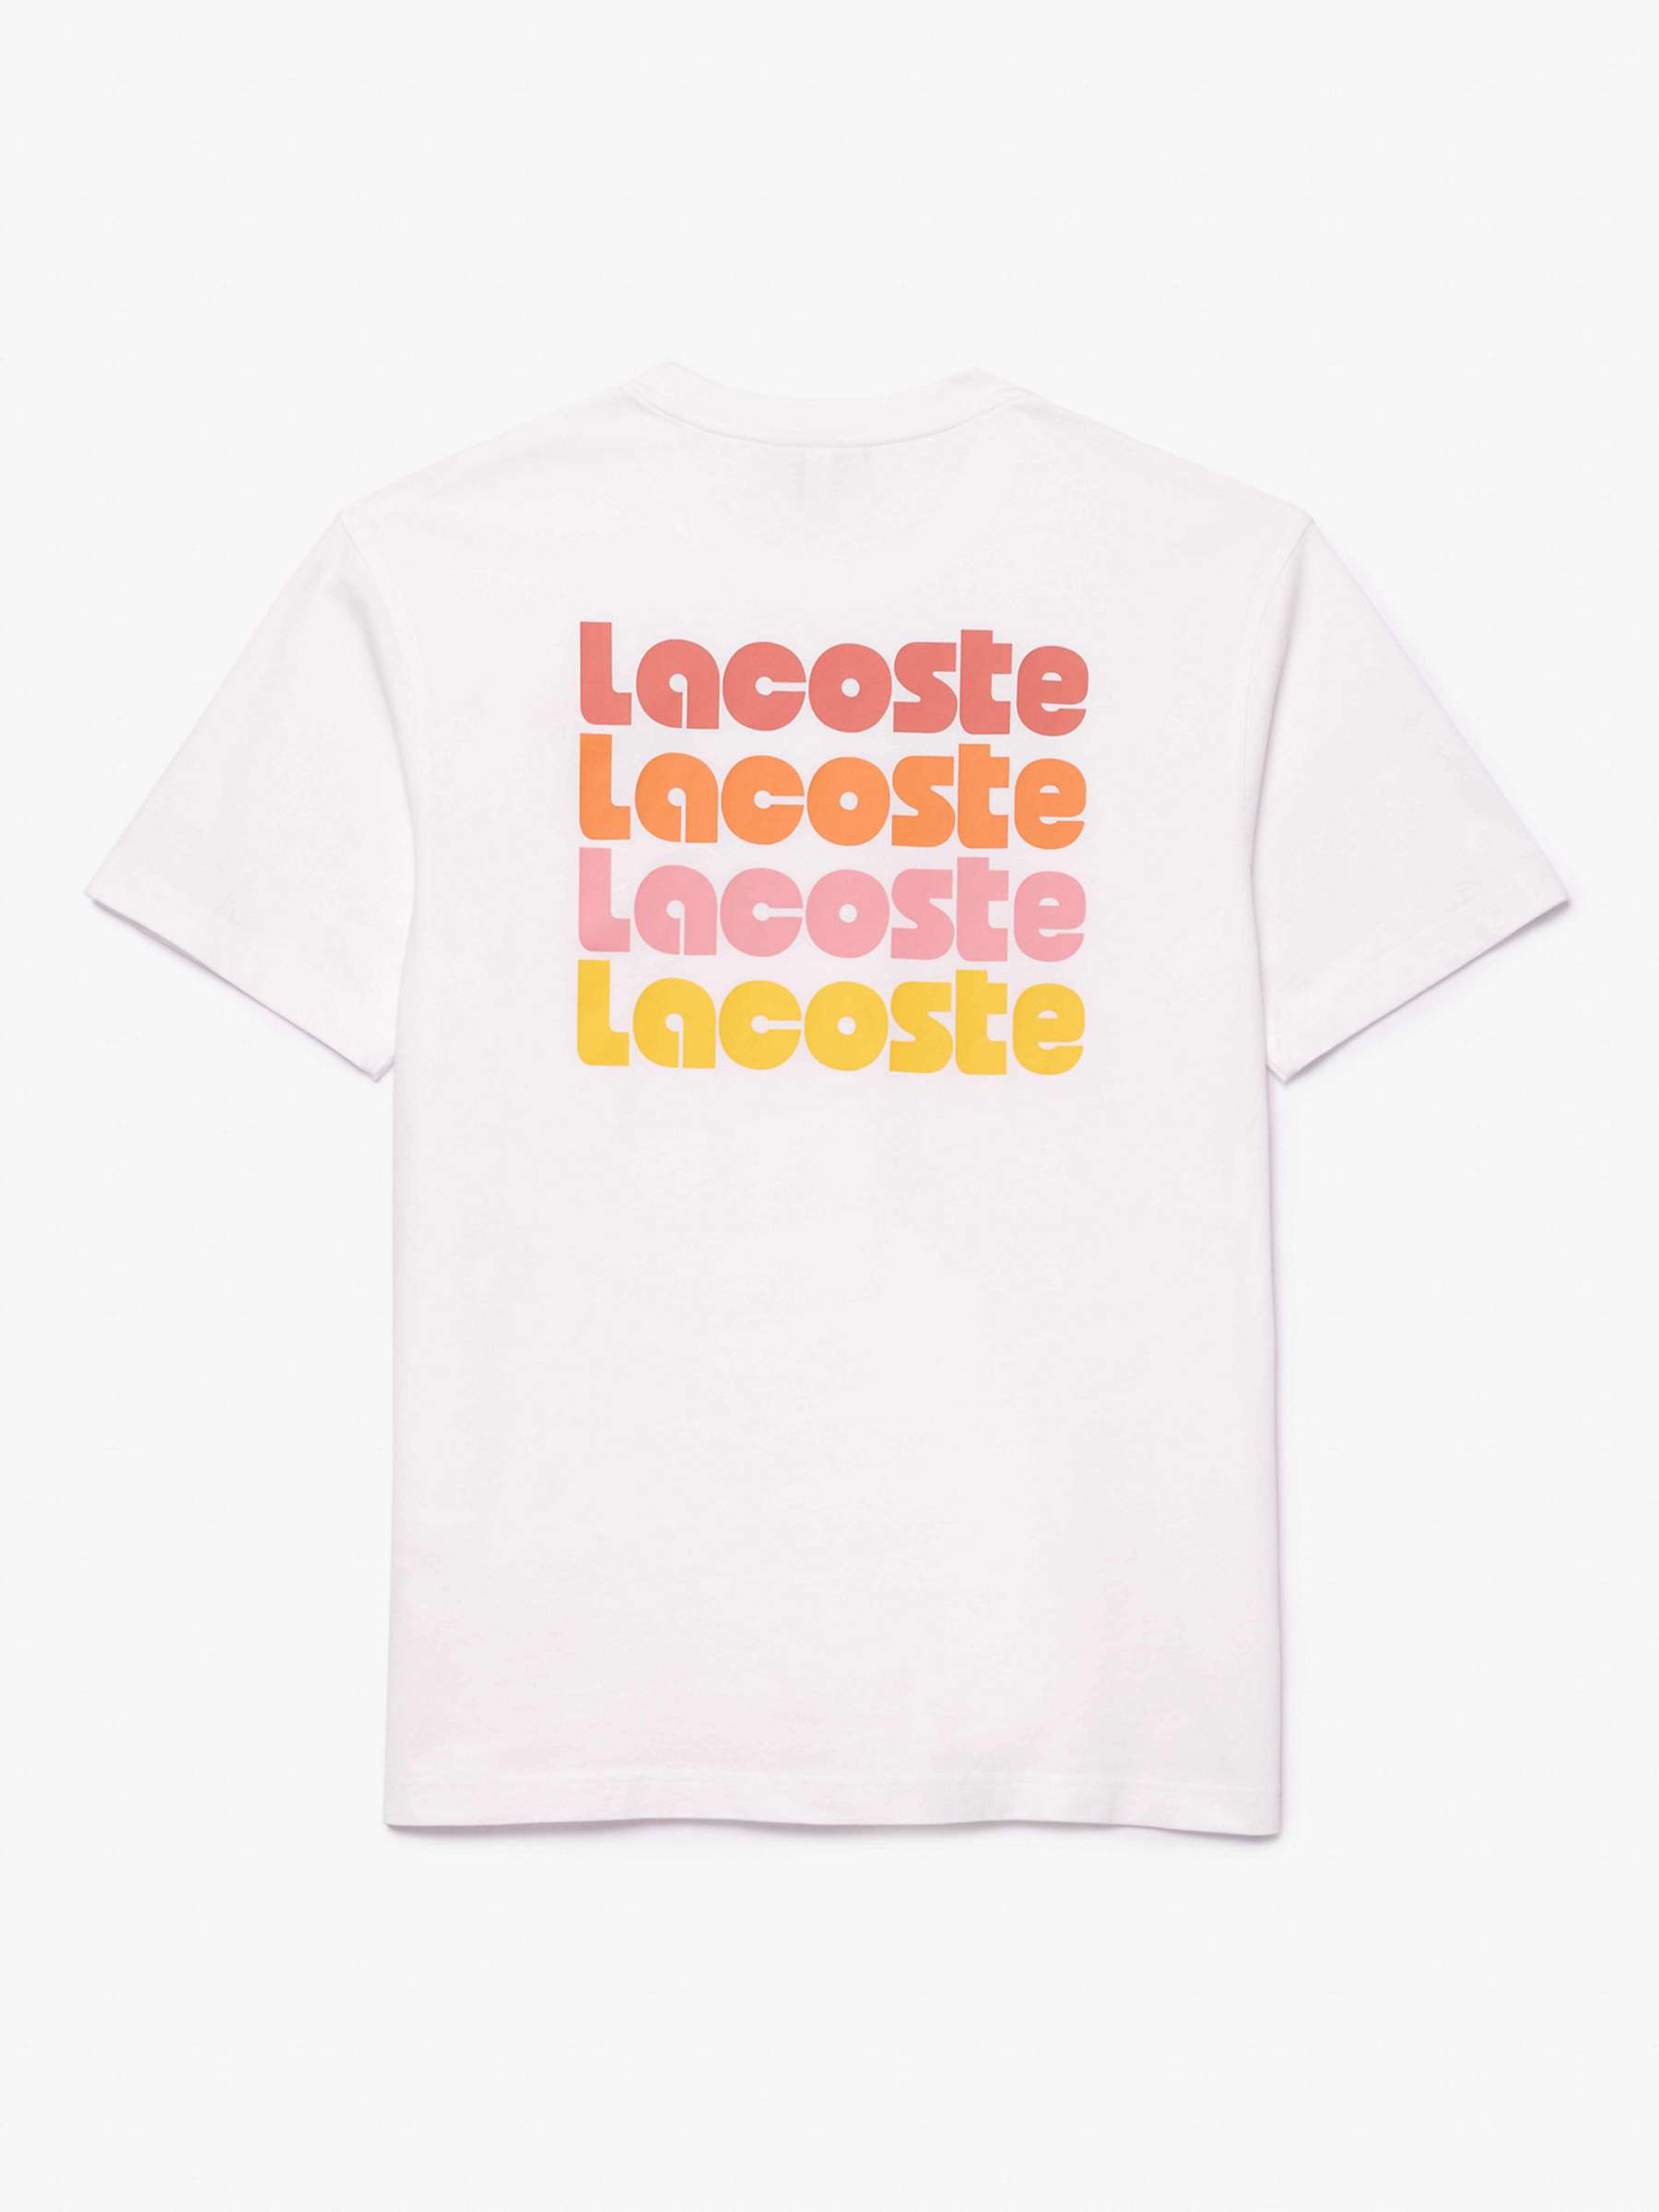 Buy Lacoste Summer Print T-Shirt, White Online at johnlewis.com